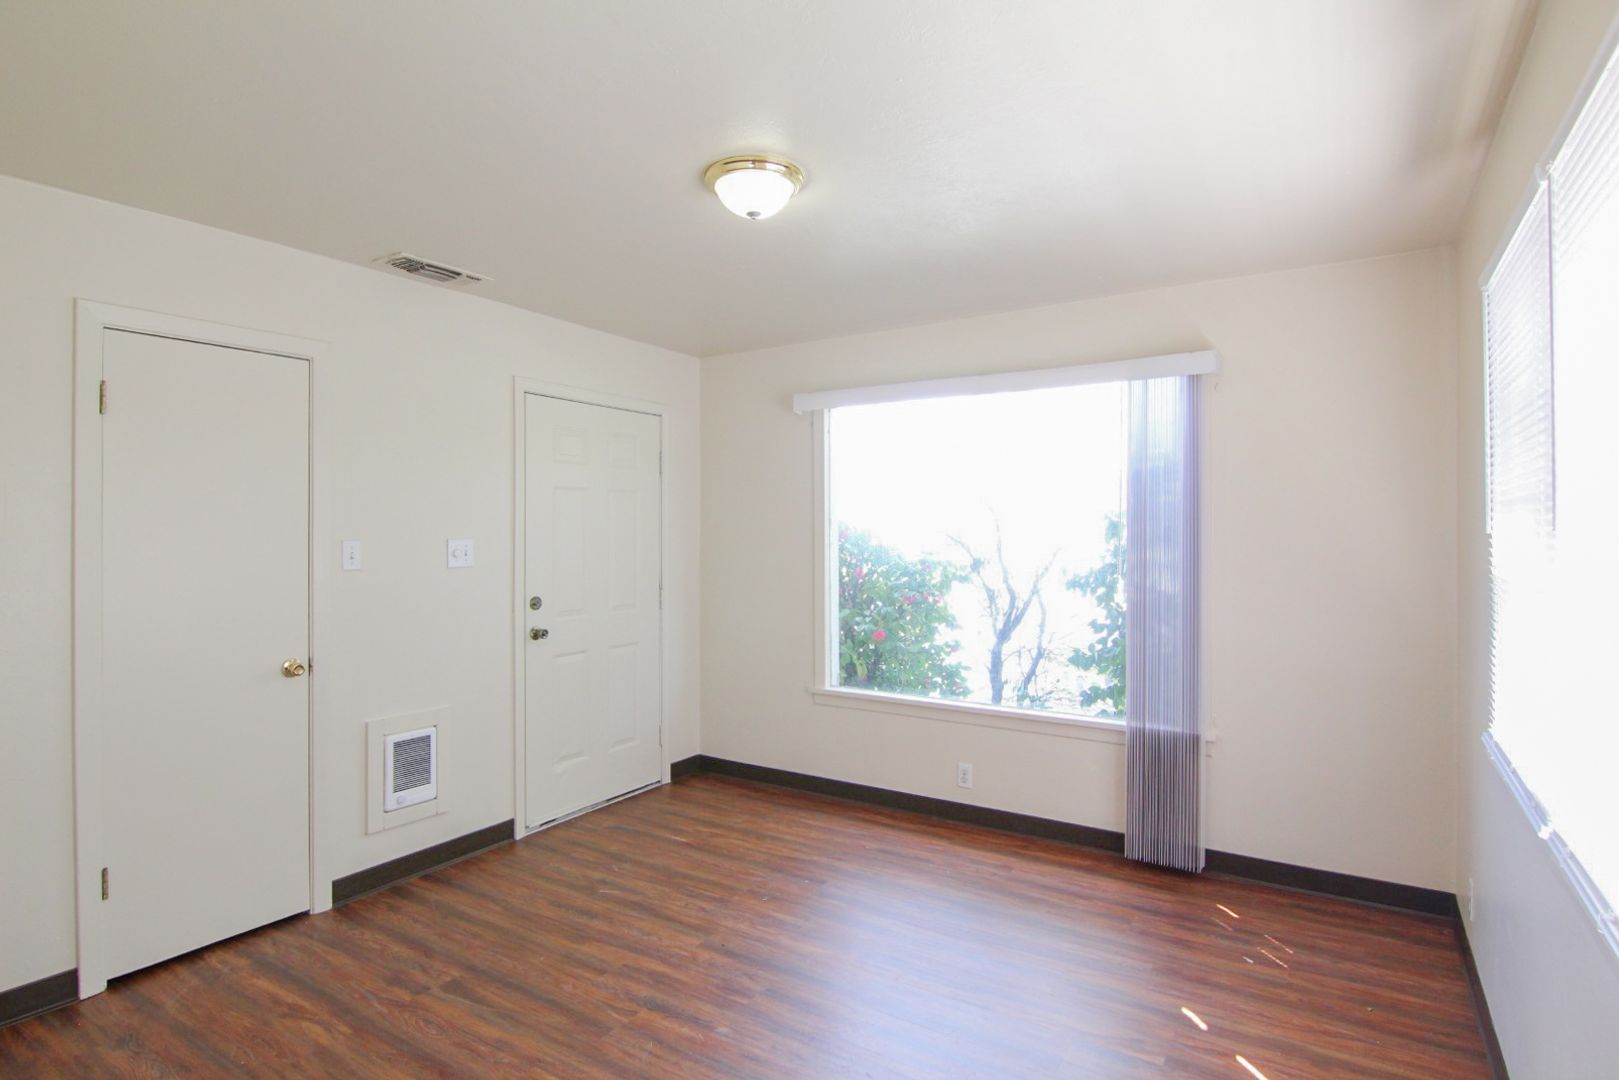 Conveniently Located Duplex Unit with Laundry Room